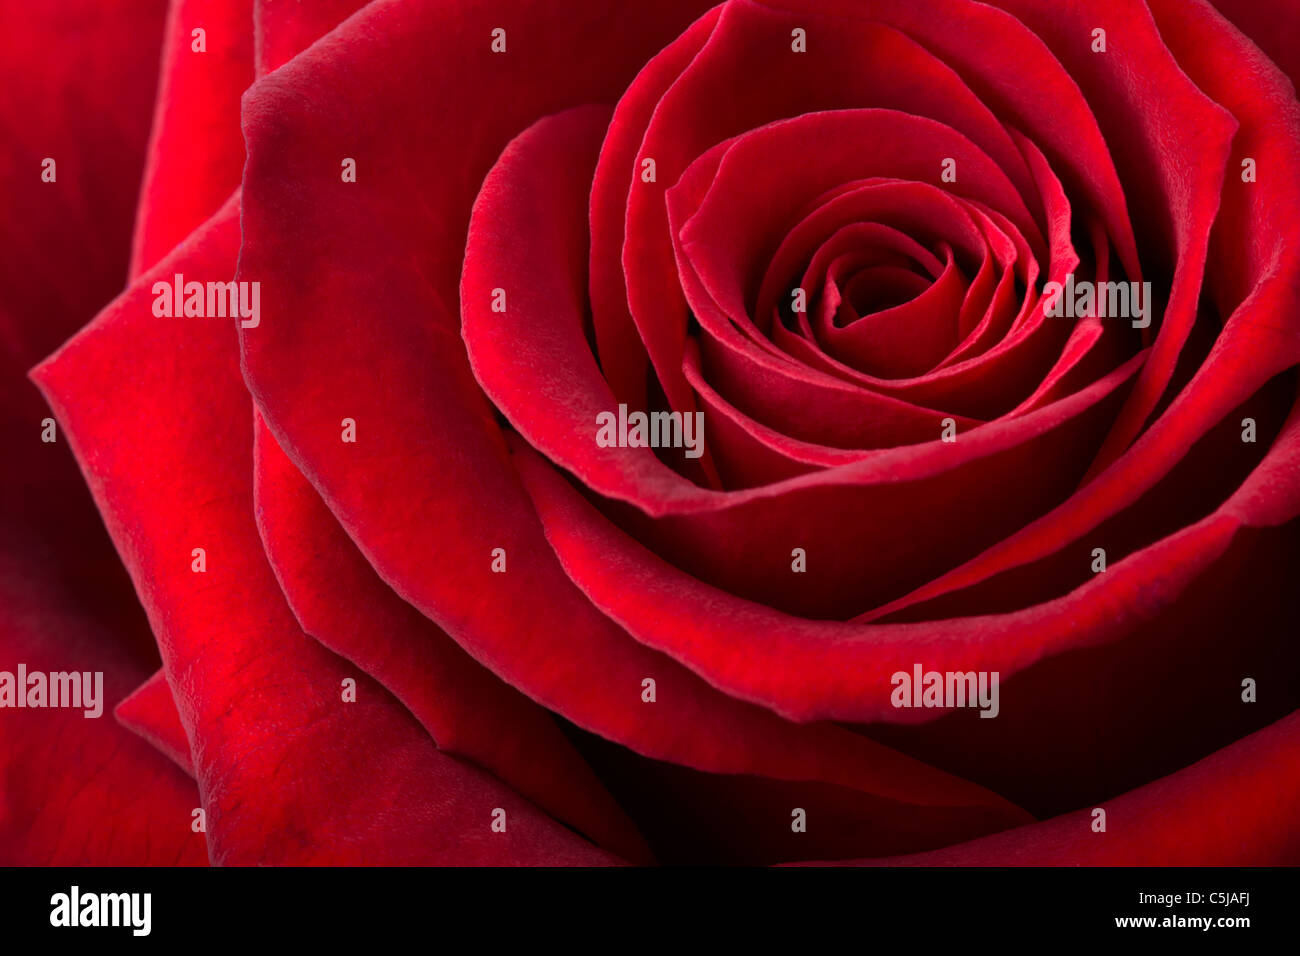 Red rose background Stock Photo